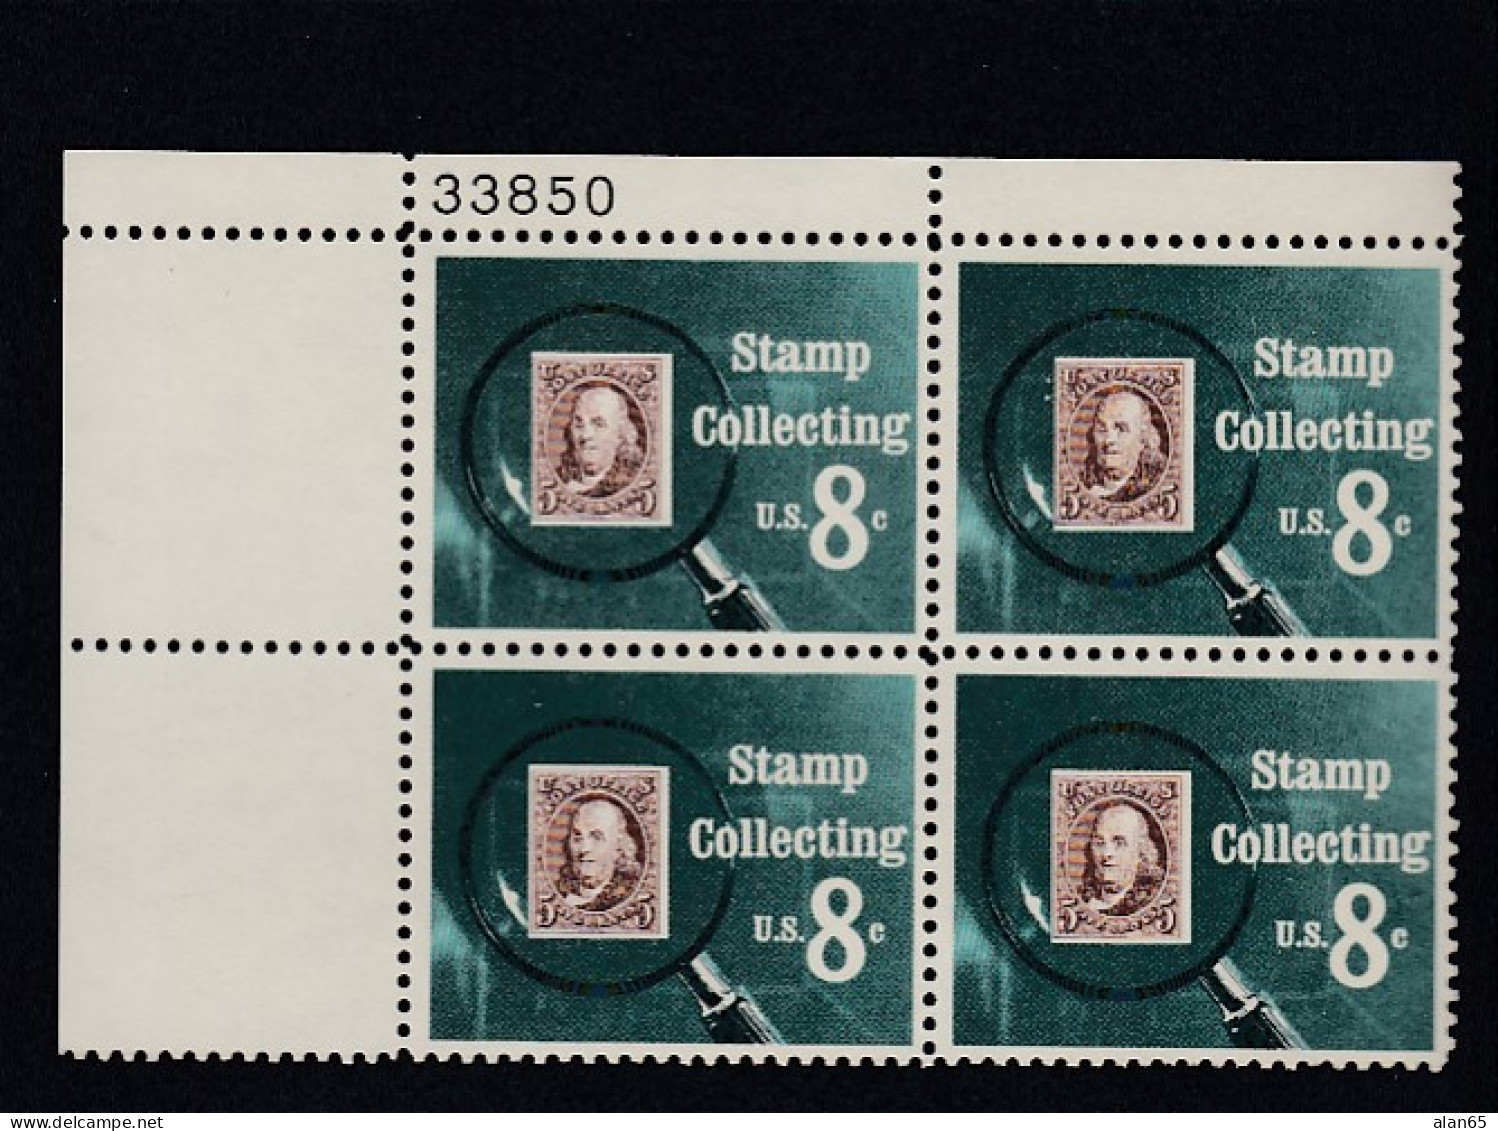 Sc#1474, 8-cent Stamp Collecting Theme 1972 Issue, Plate # Block Of 4 US Stamps - Numero Di Lastre